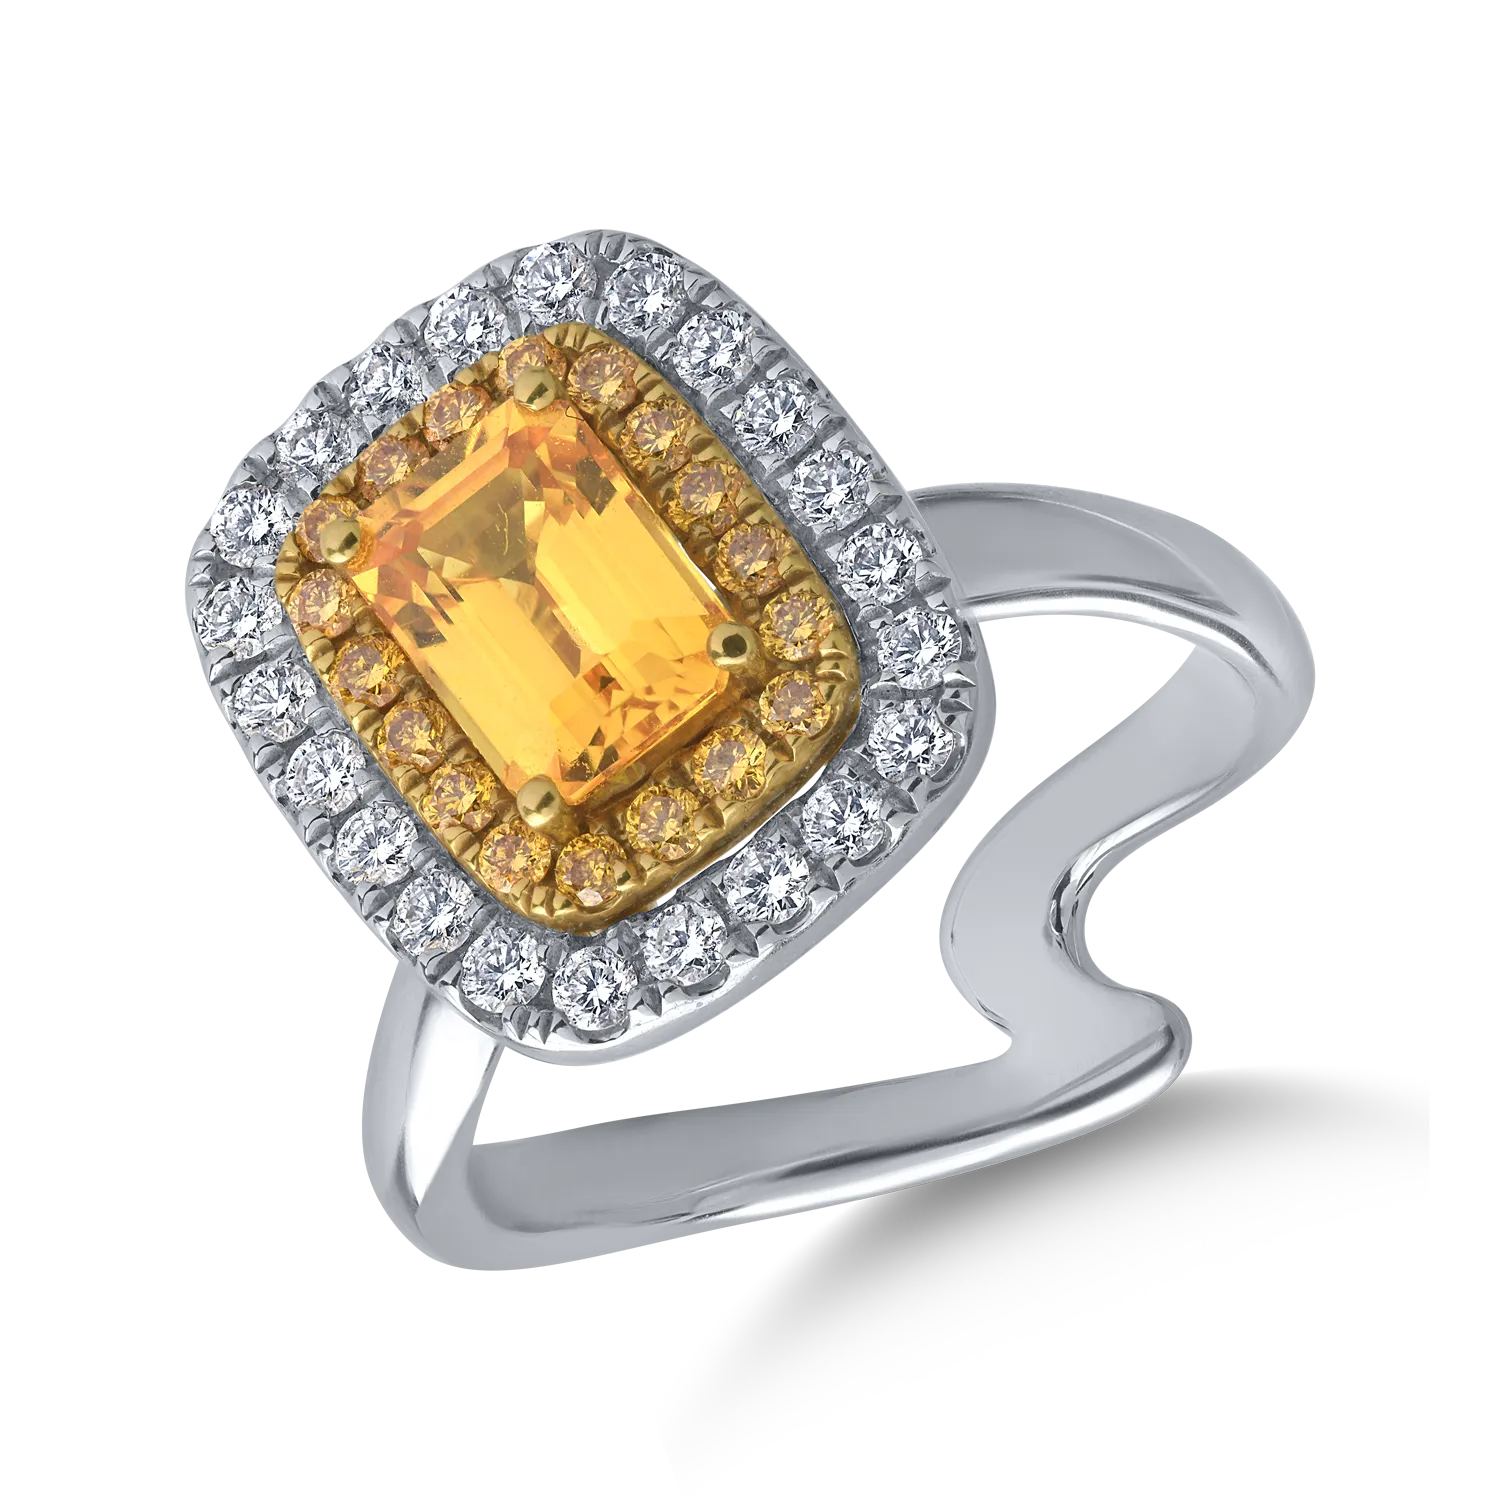 18K white gold ring with 1.4ct yellow sapphire and 0.54ct diamonds